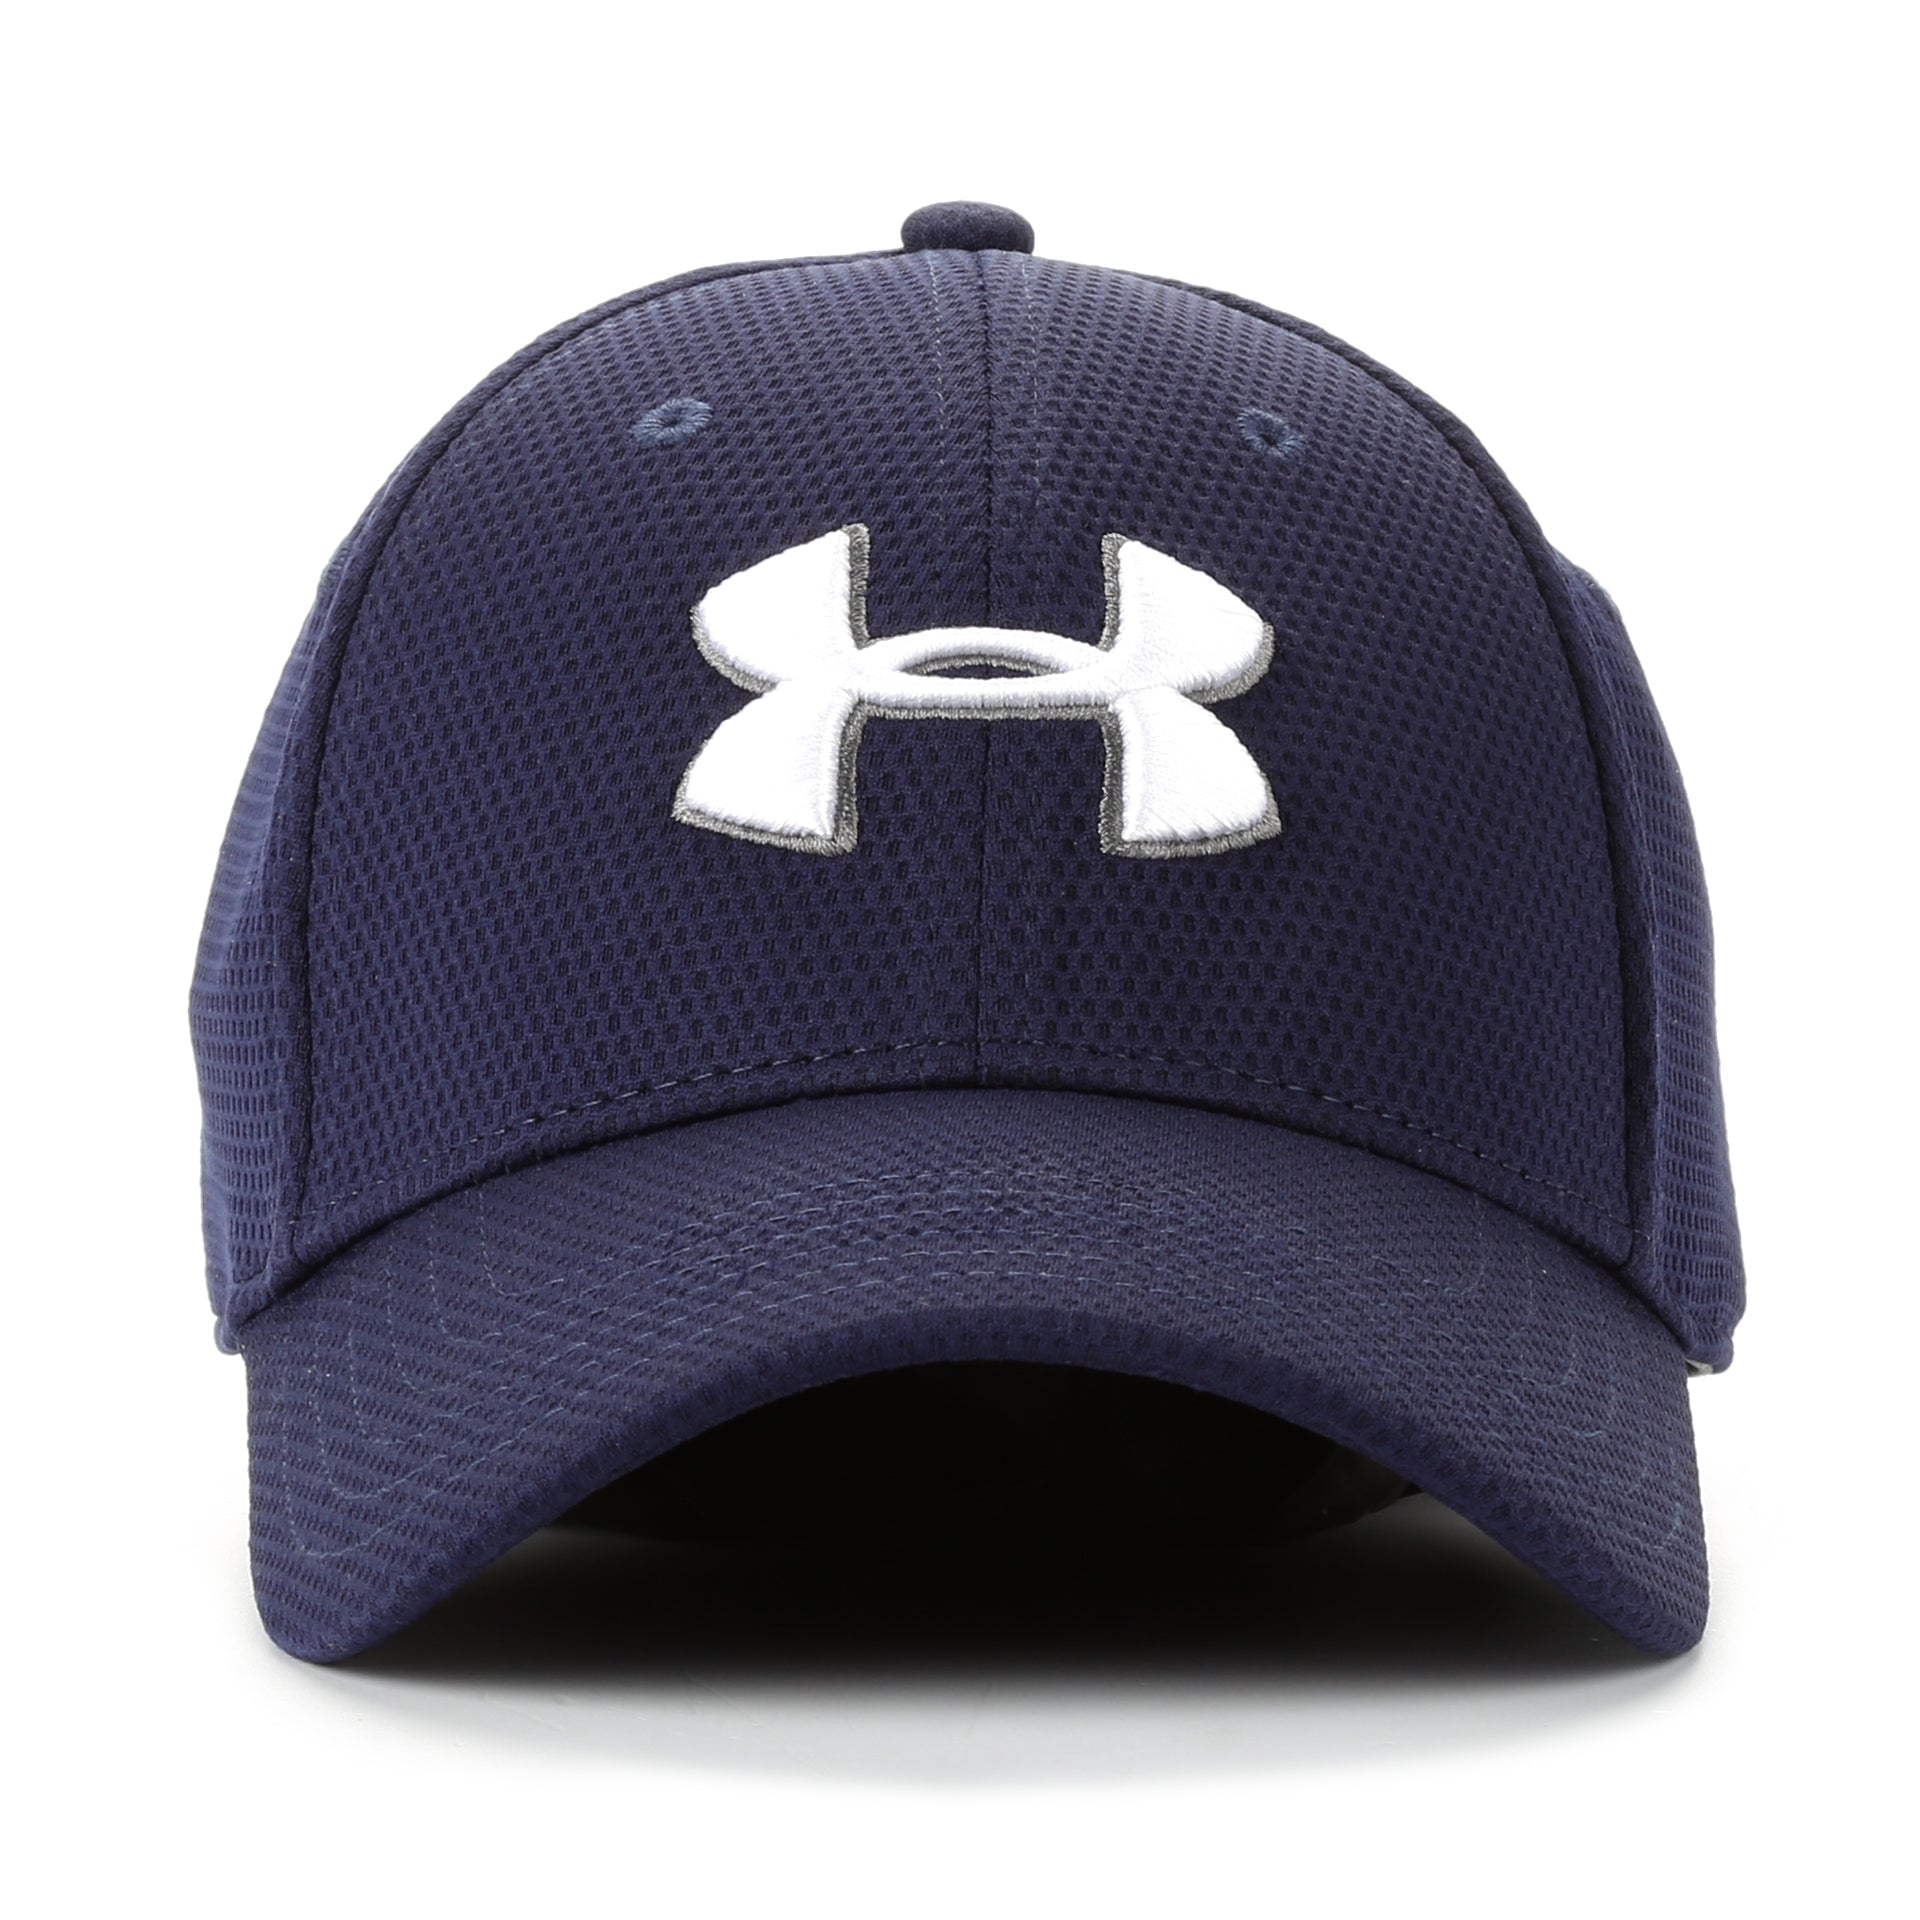 Under Armour Blitzing II Stretch Fit Hat - Navy/White - New Star